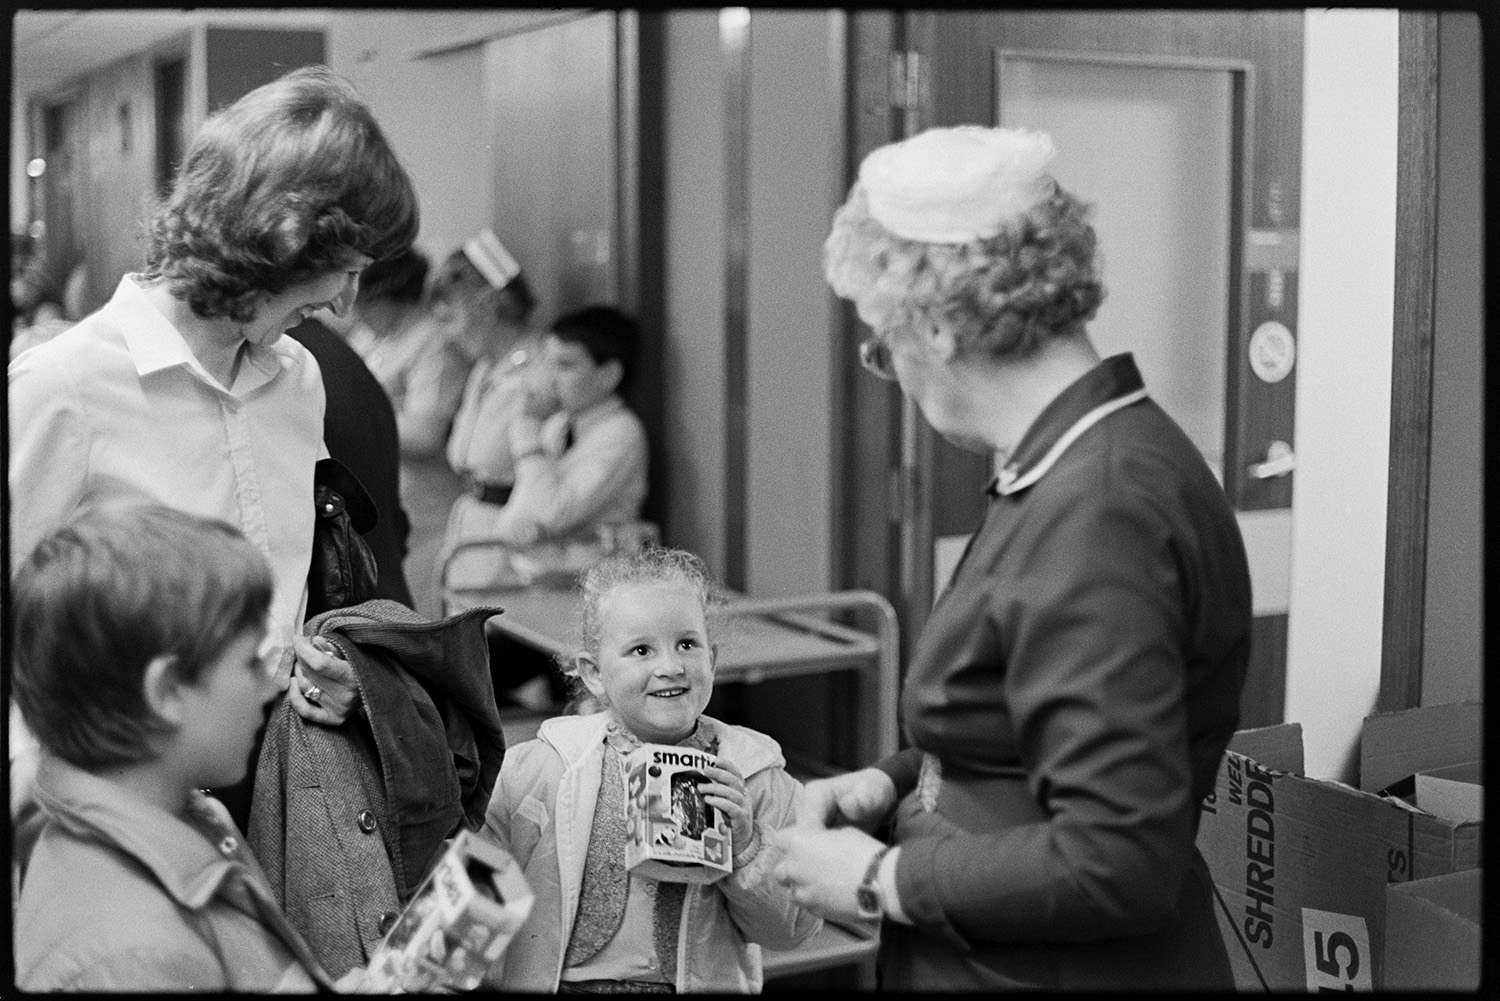 Ward Sister and nurses in ward of hospital. 
[The Ward Sister or Matron of the Children's Ward in Barnstaple General Hospital handing out Easter eggs to two children with a woman.]